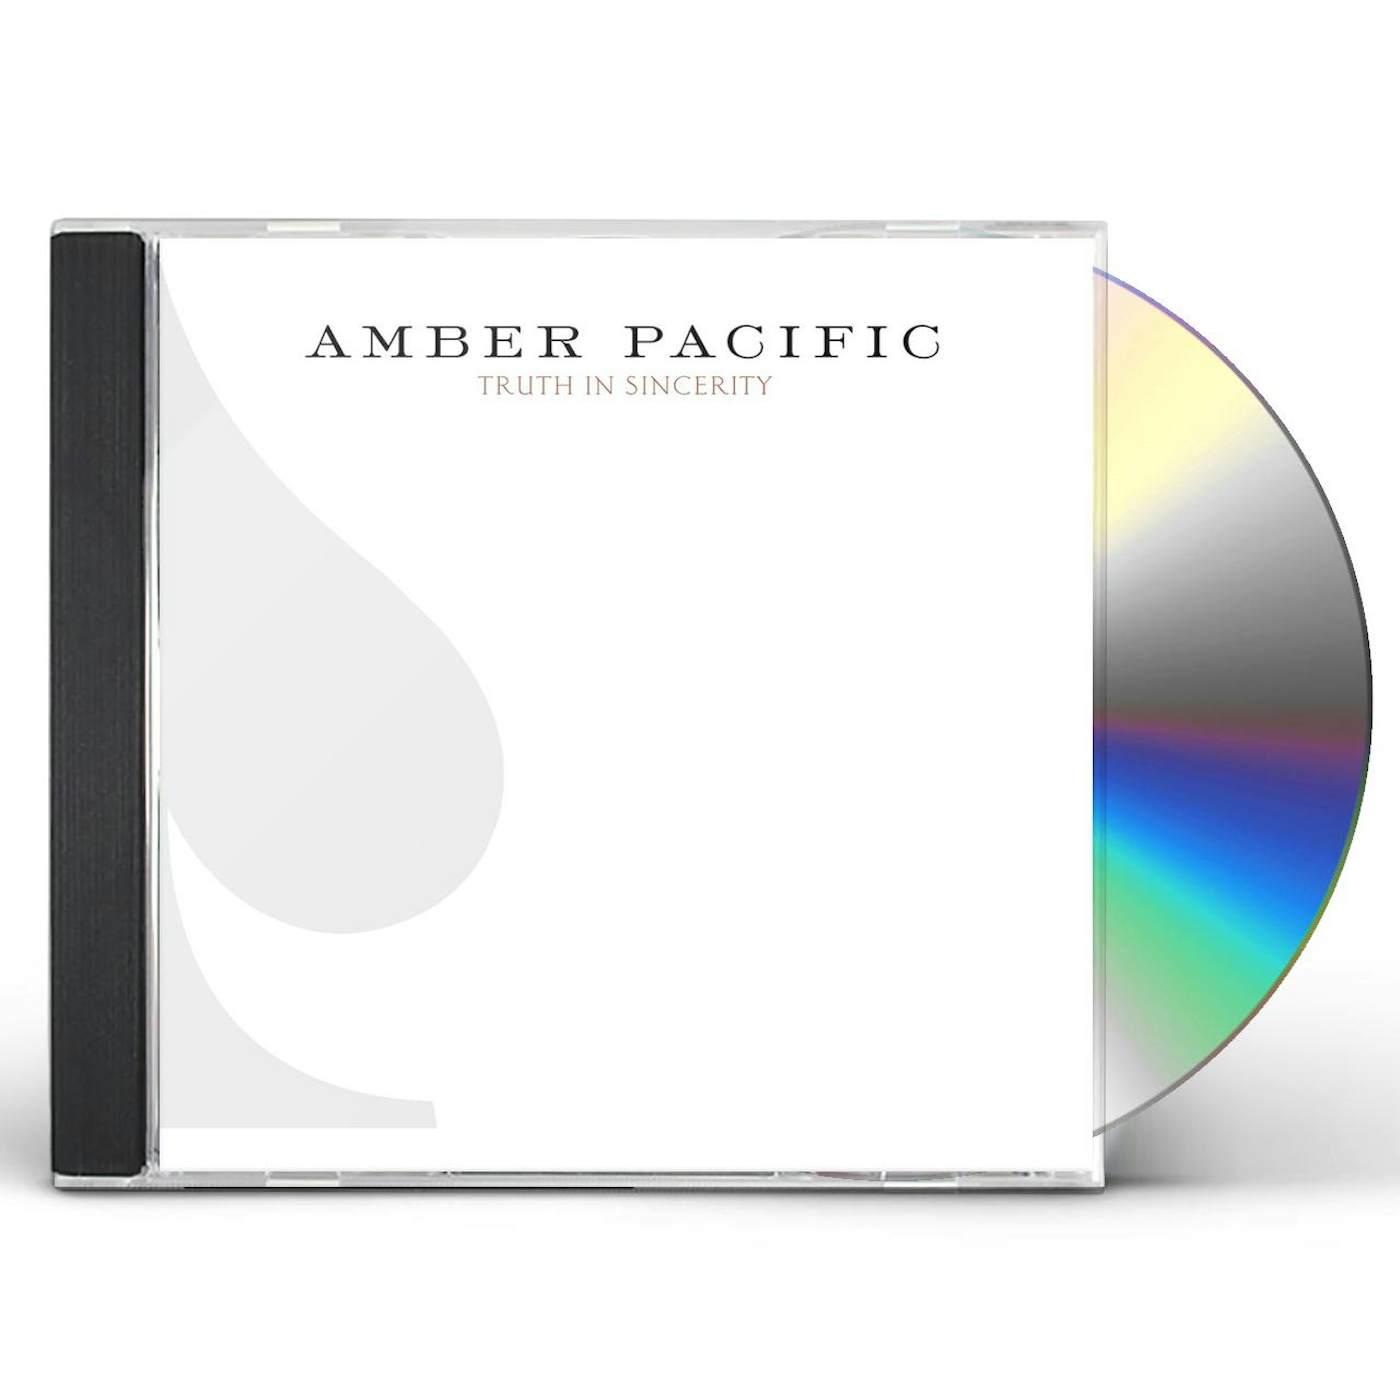 Amber Pacific TRUTH IN SINCERITY CD